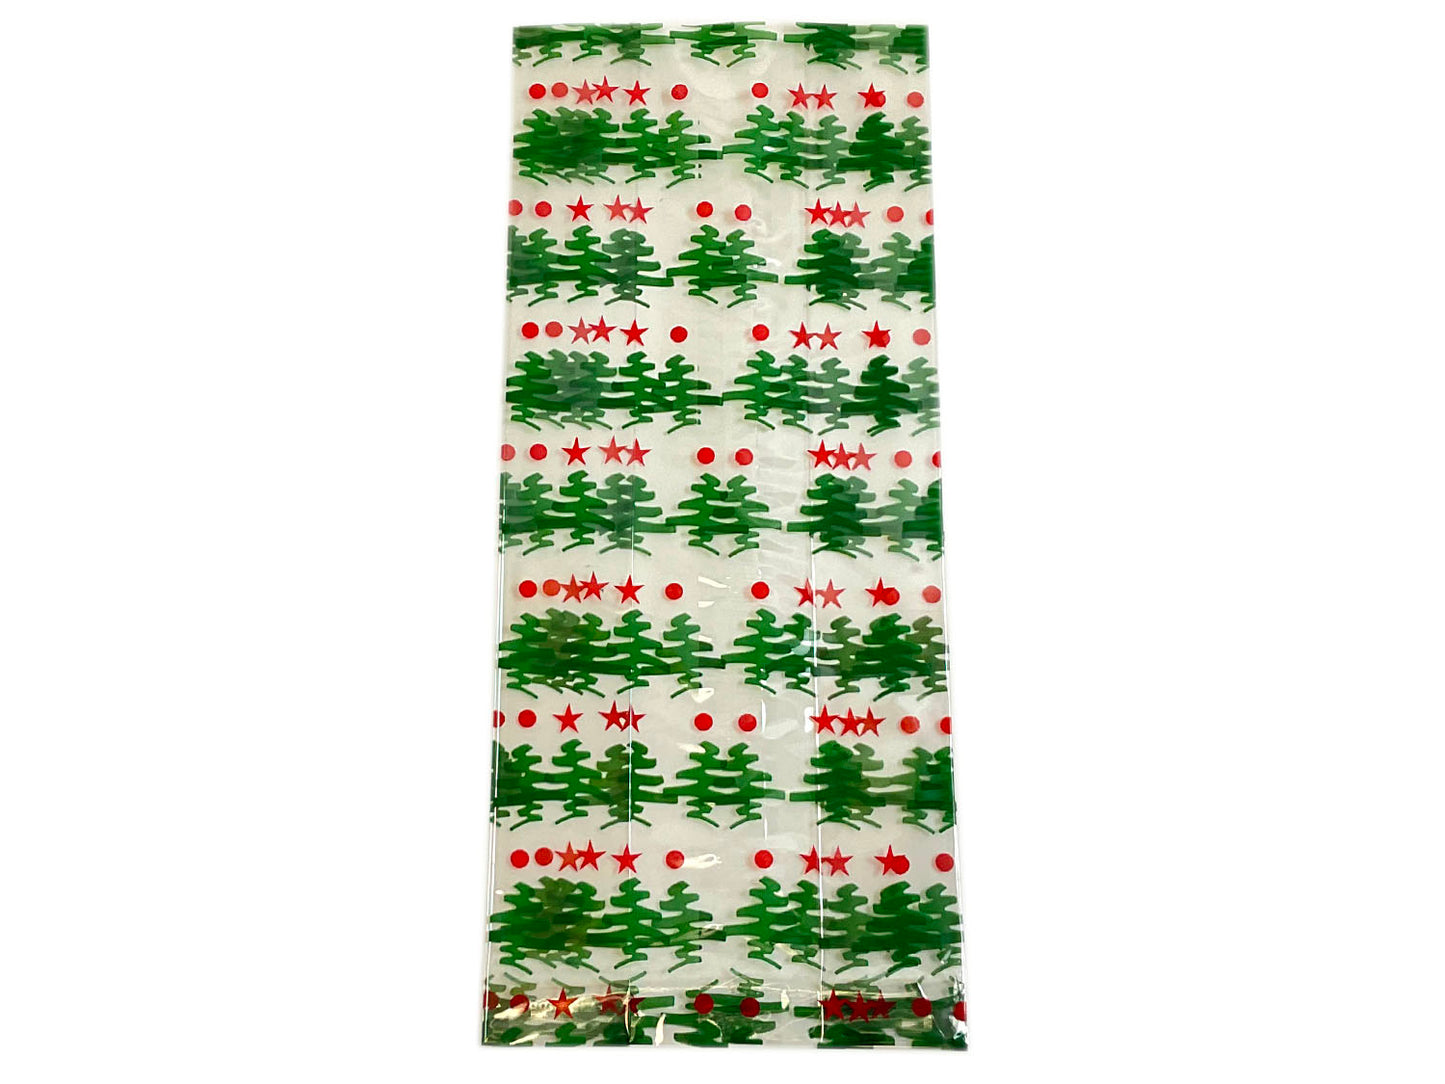 Party Favor Bags - Green Christmas Trees